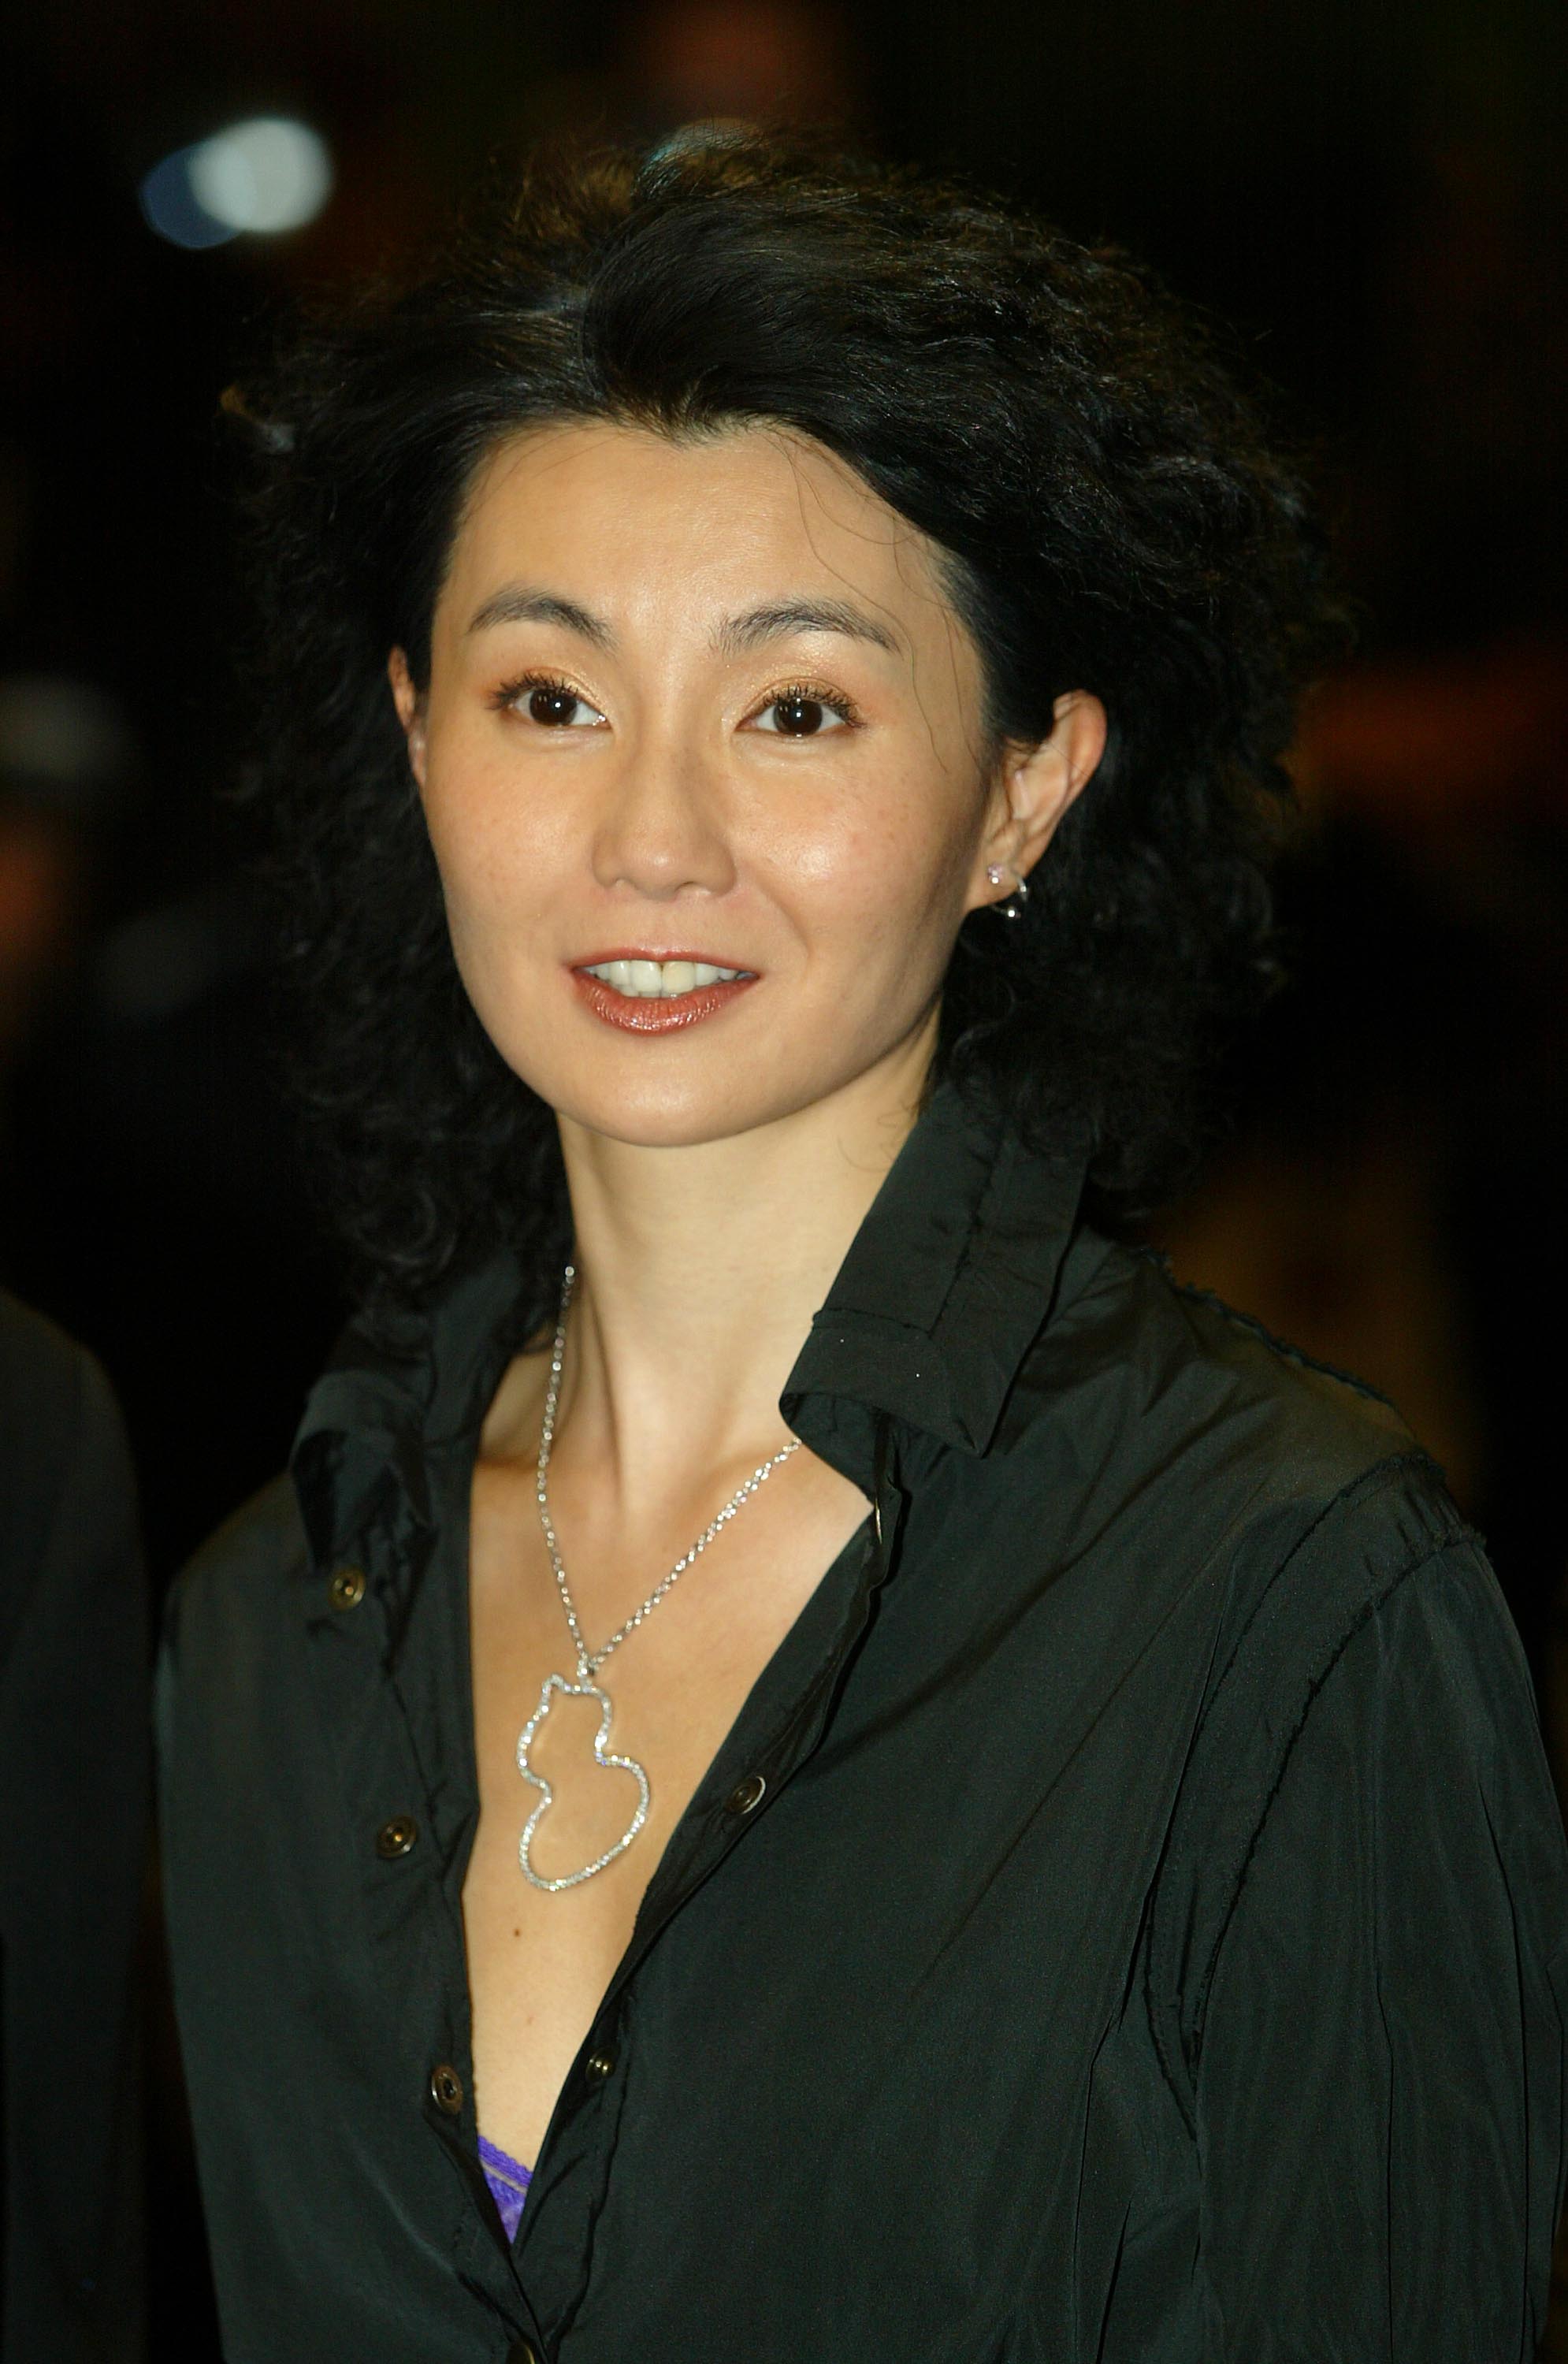 Beautiful Photos Of The Chinese Actress Maggie Cheung Boomsbeat 2741